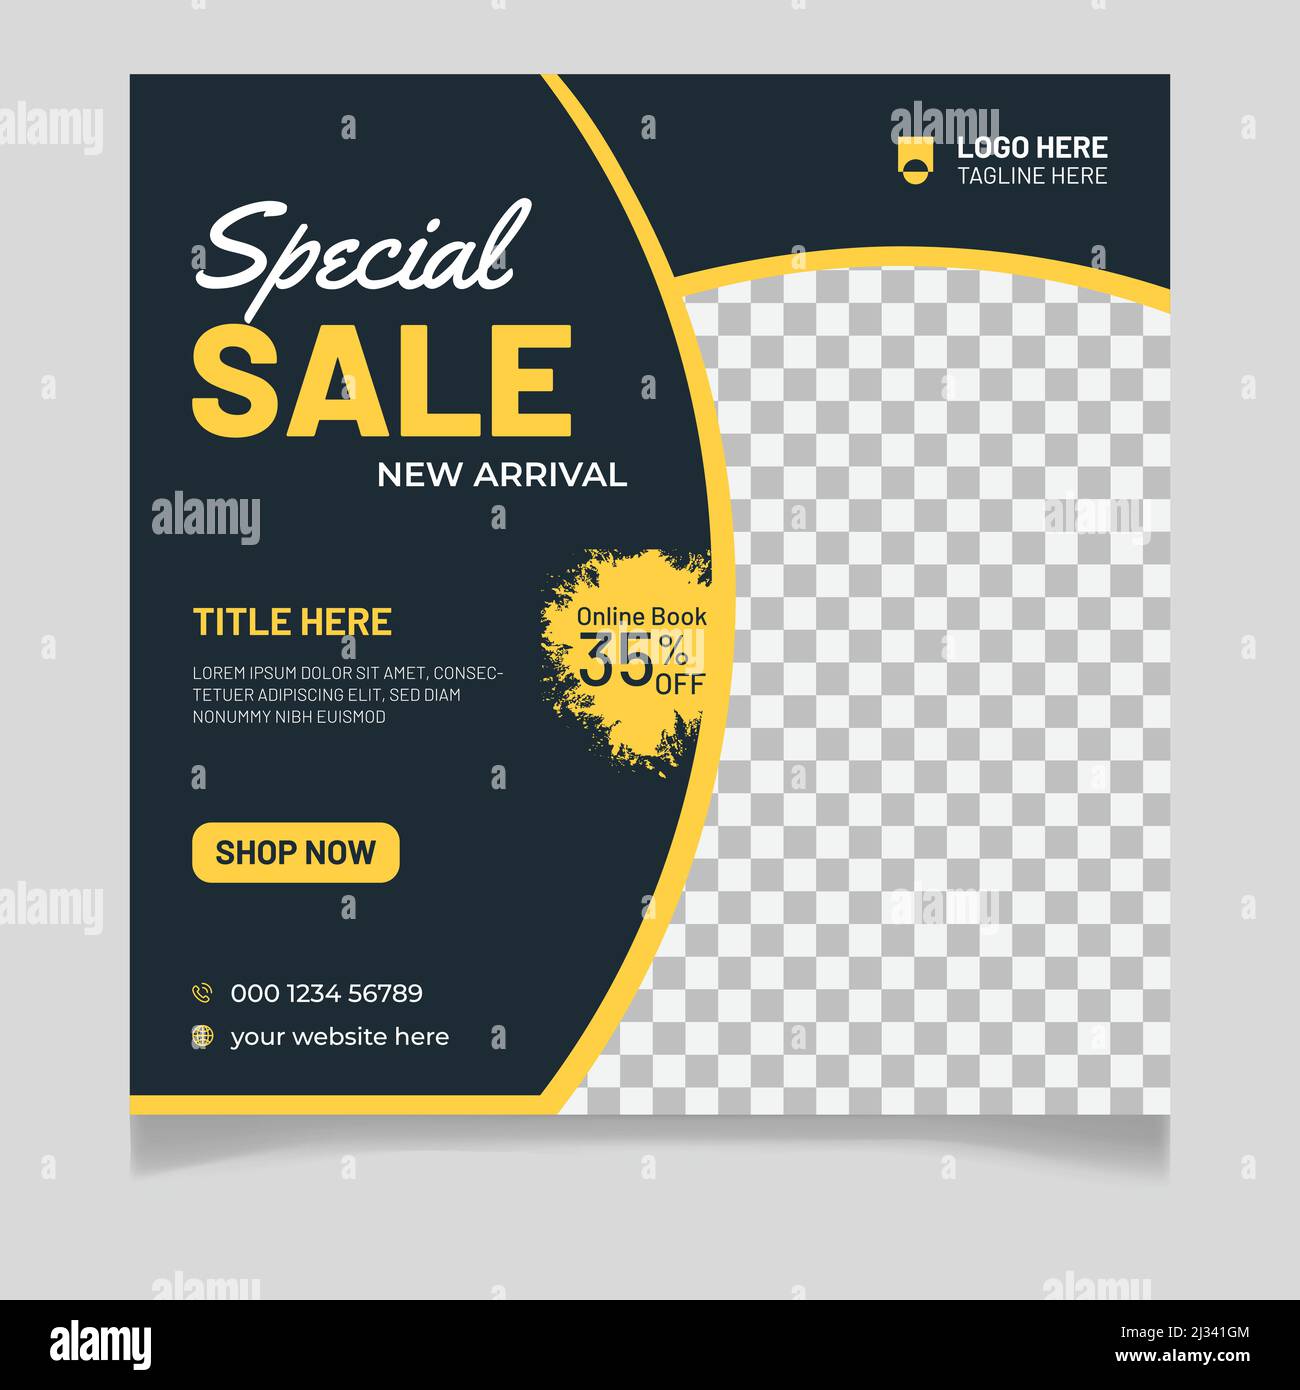 Special Sale New Arrival Fashion Social Media Post Template Stock Vector